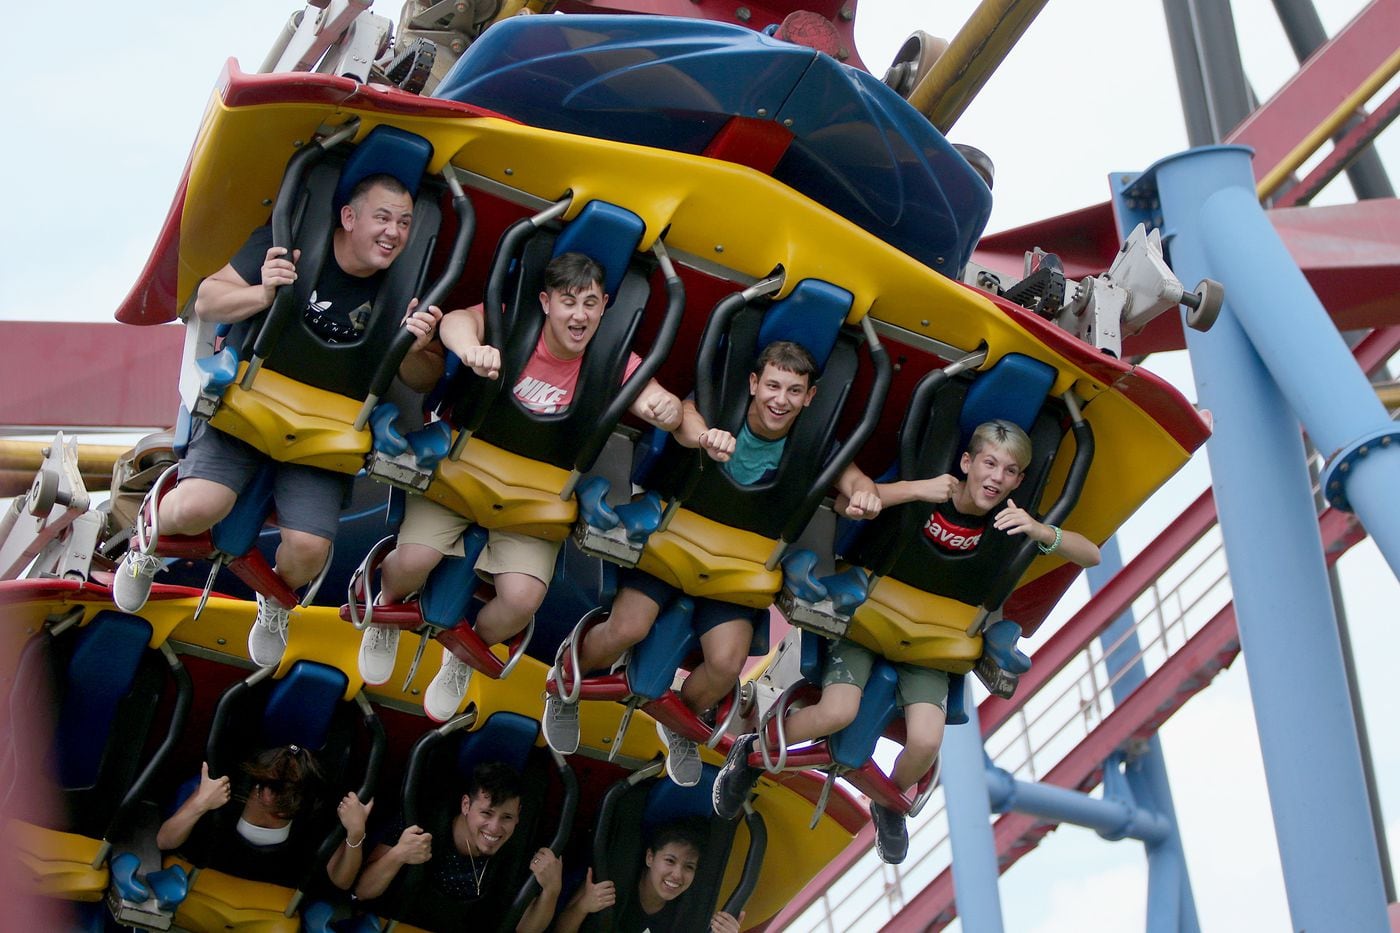 People on the Superman roller-coaster at Great Adventure.